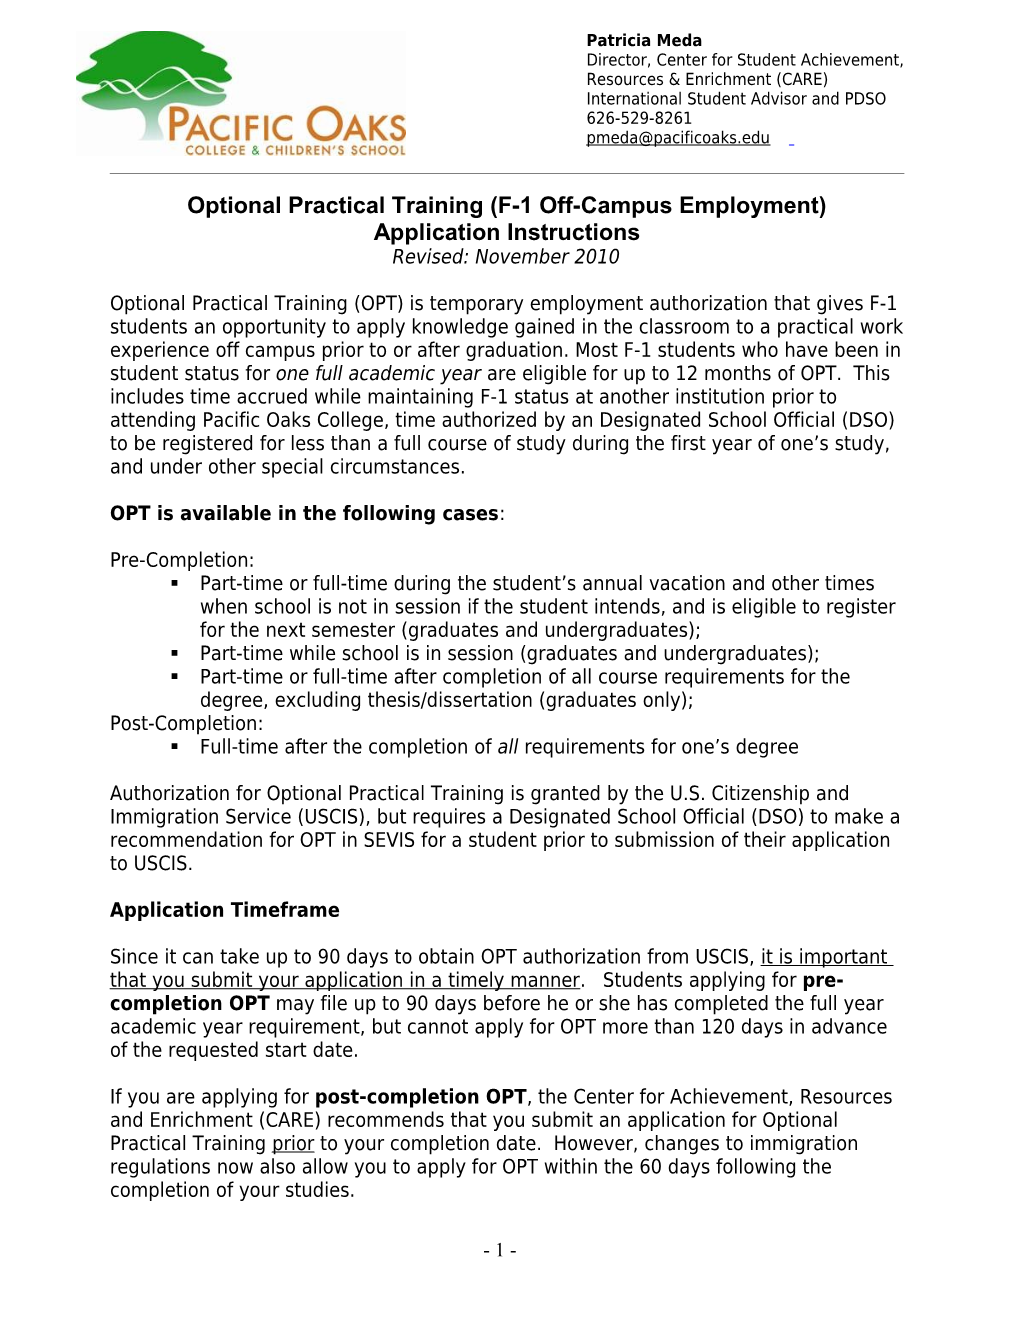 Optional Practical Training (F-1 Off-Campus Employment)